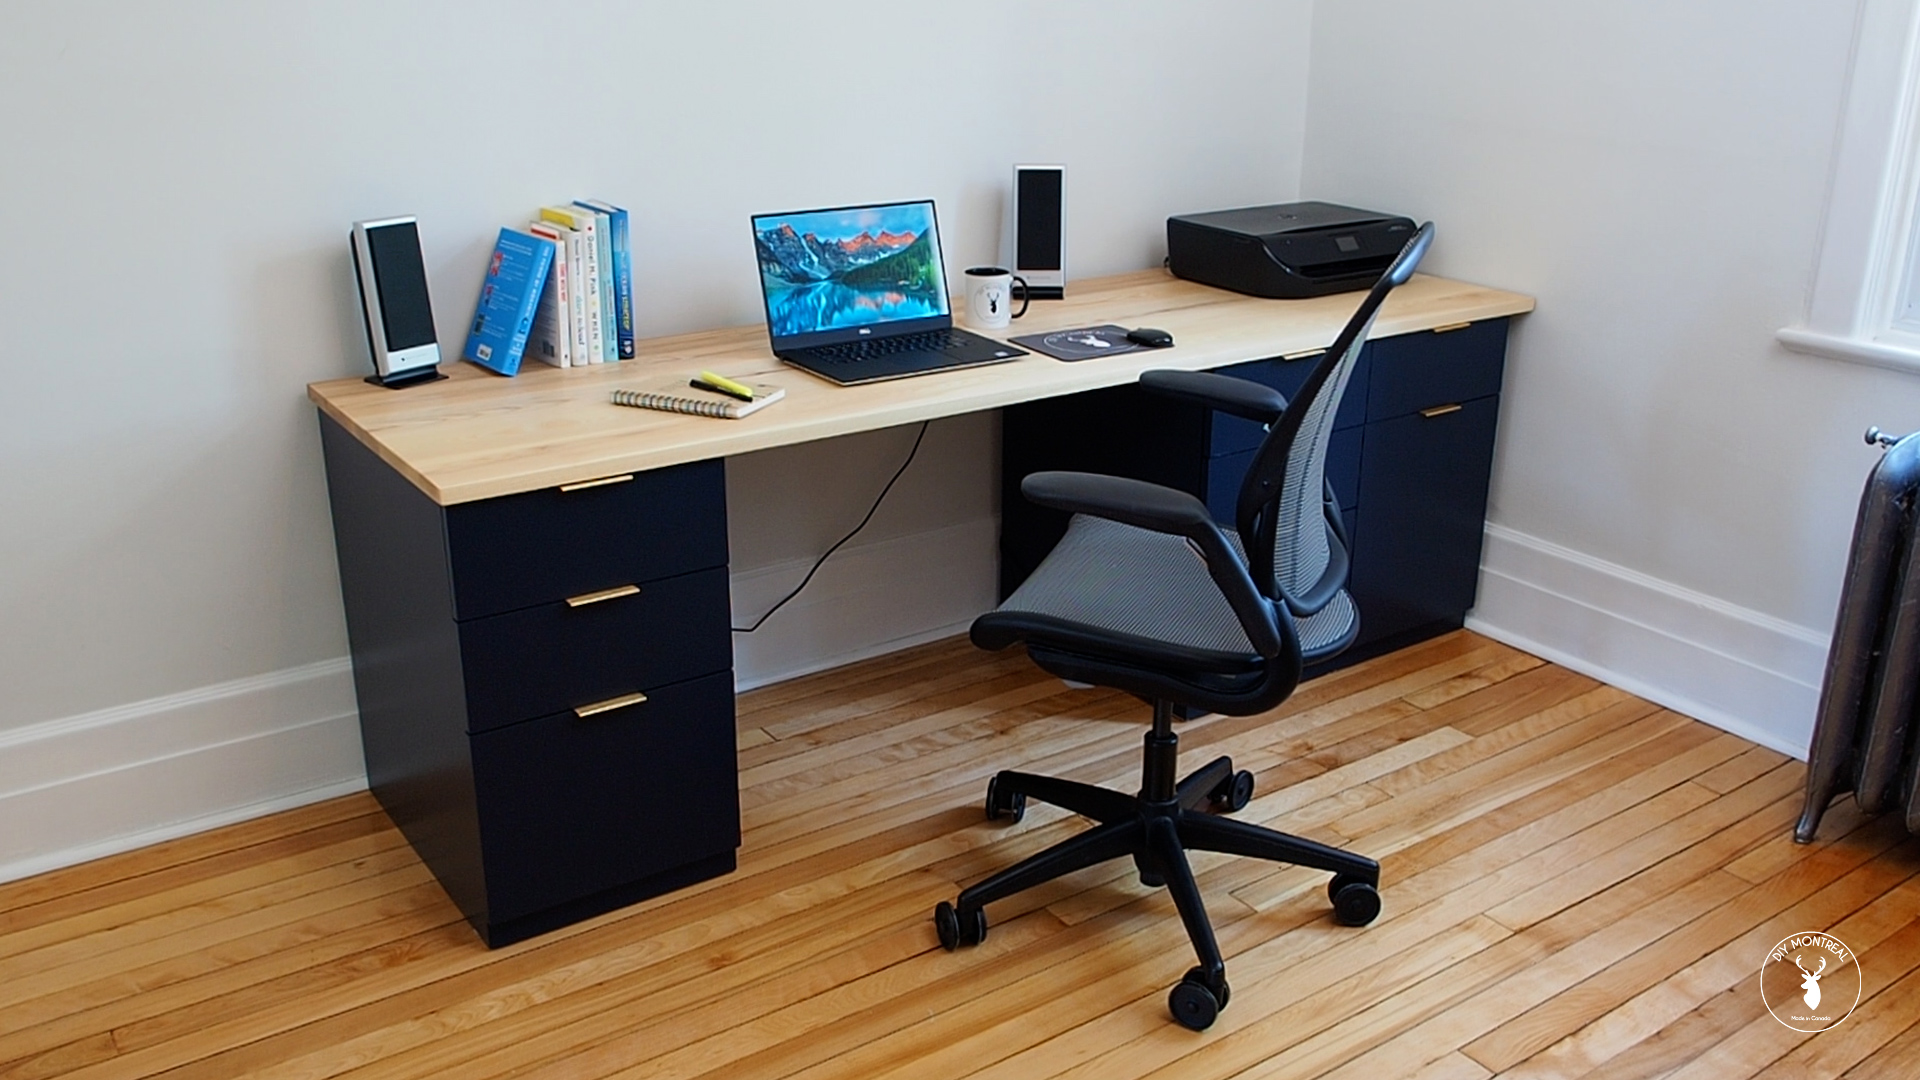 How to build a wood desk